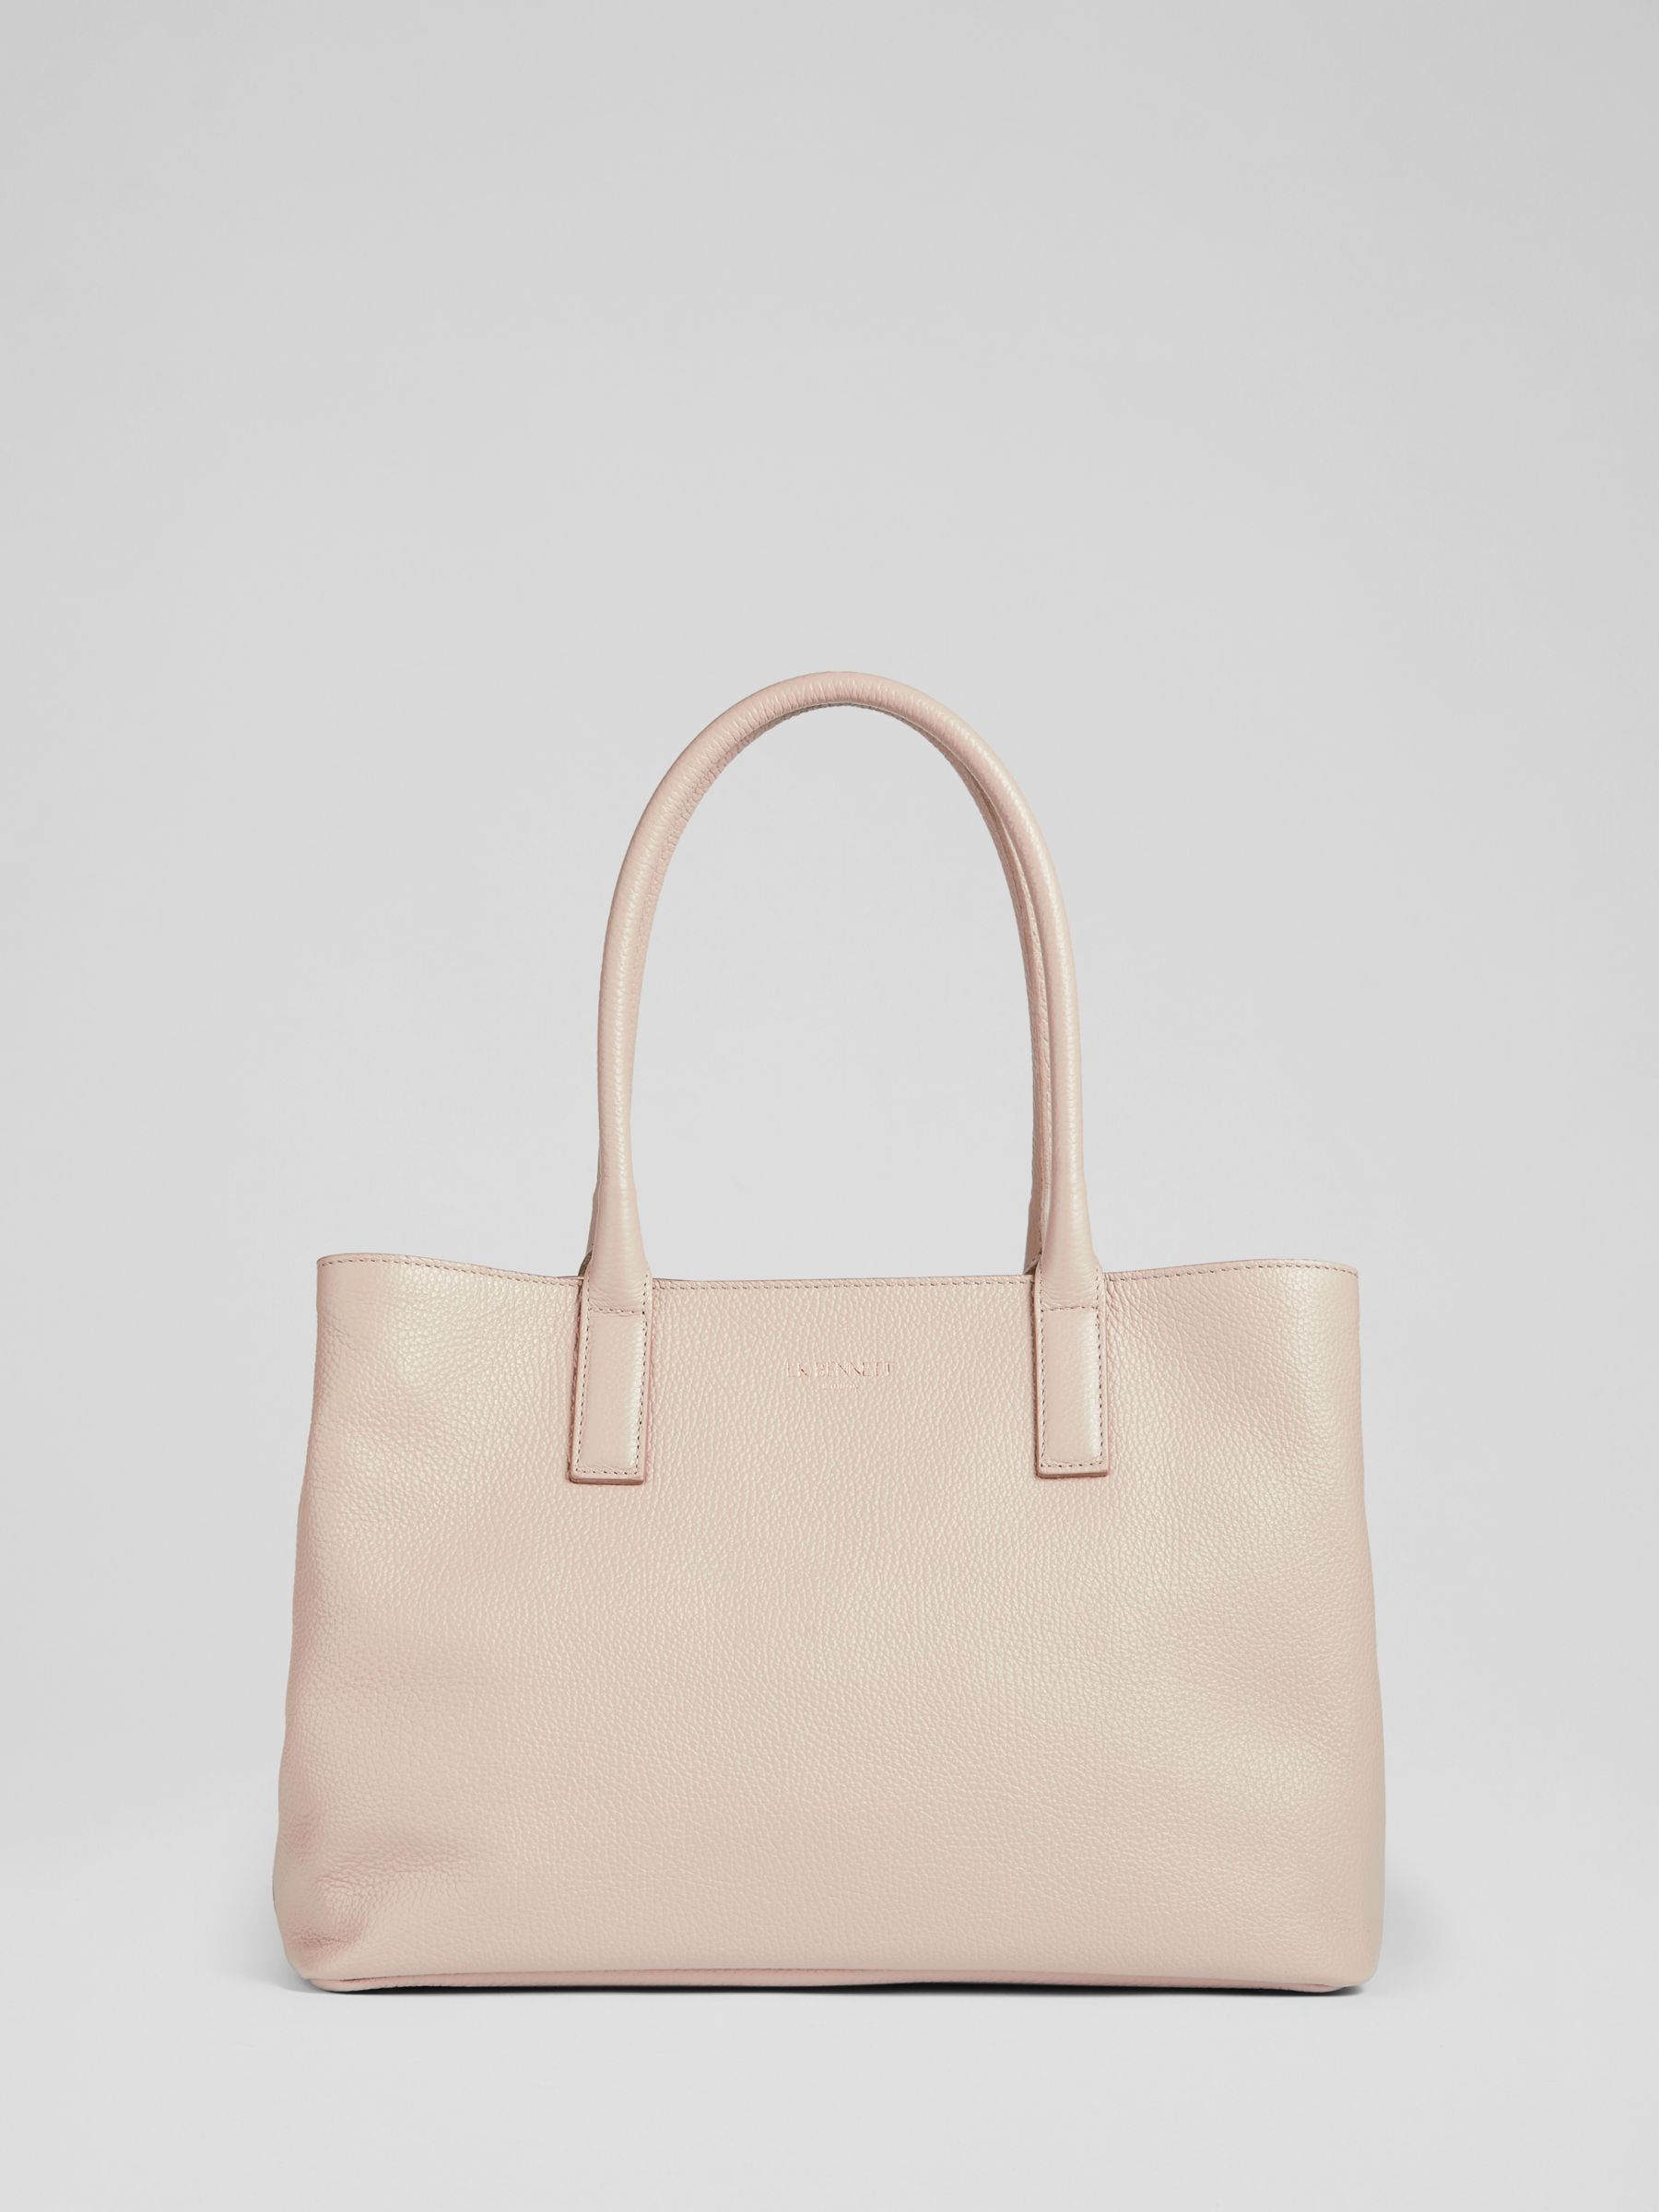 L.K.Bennett Lilian Leather Tote Bag, Taupe at John Lewis & Partners